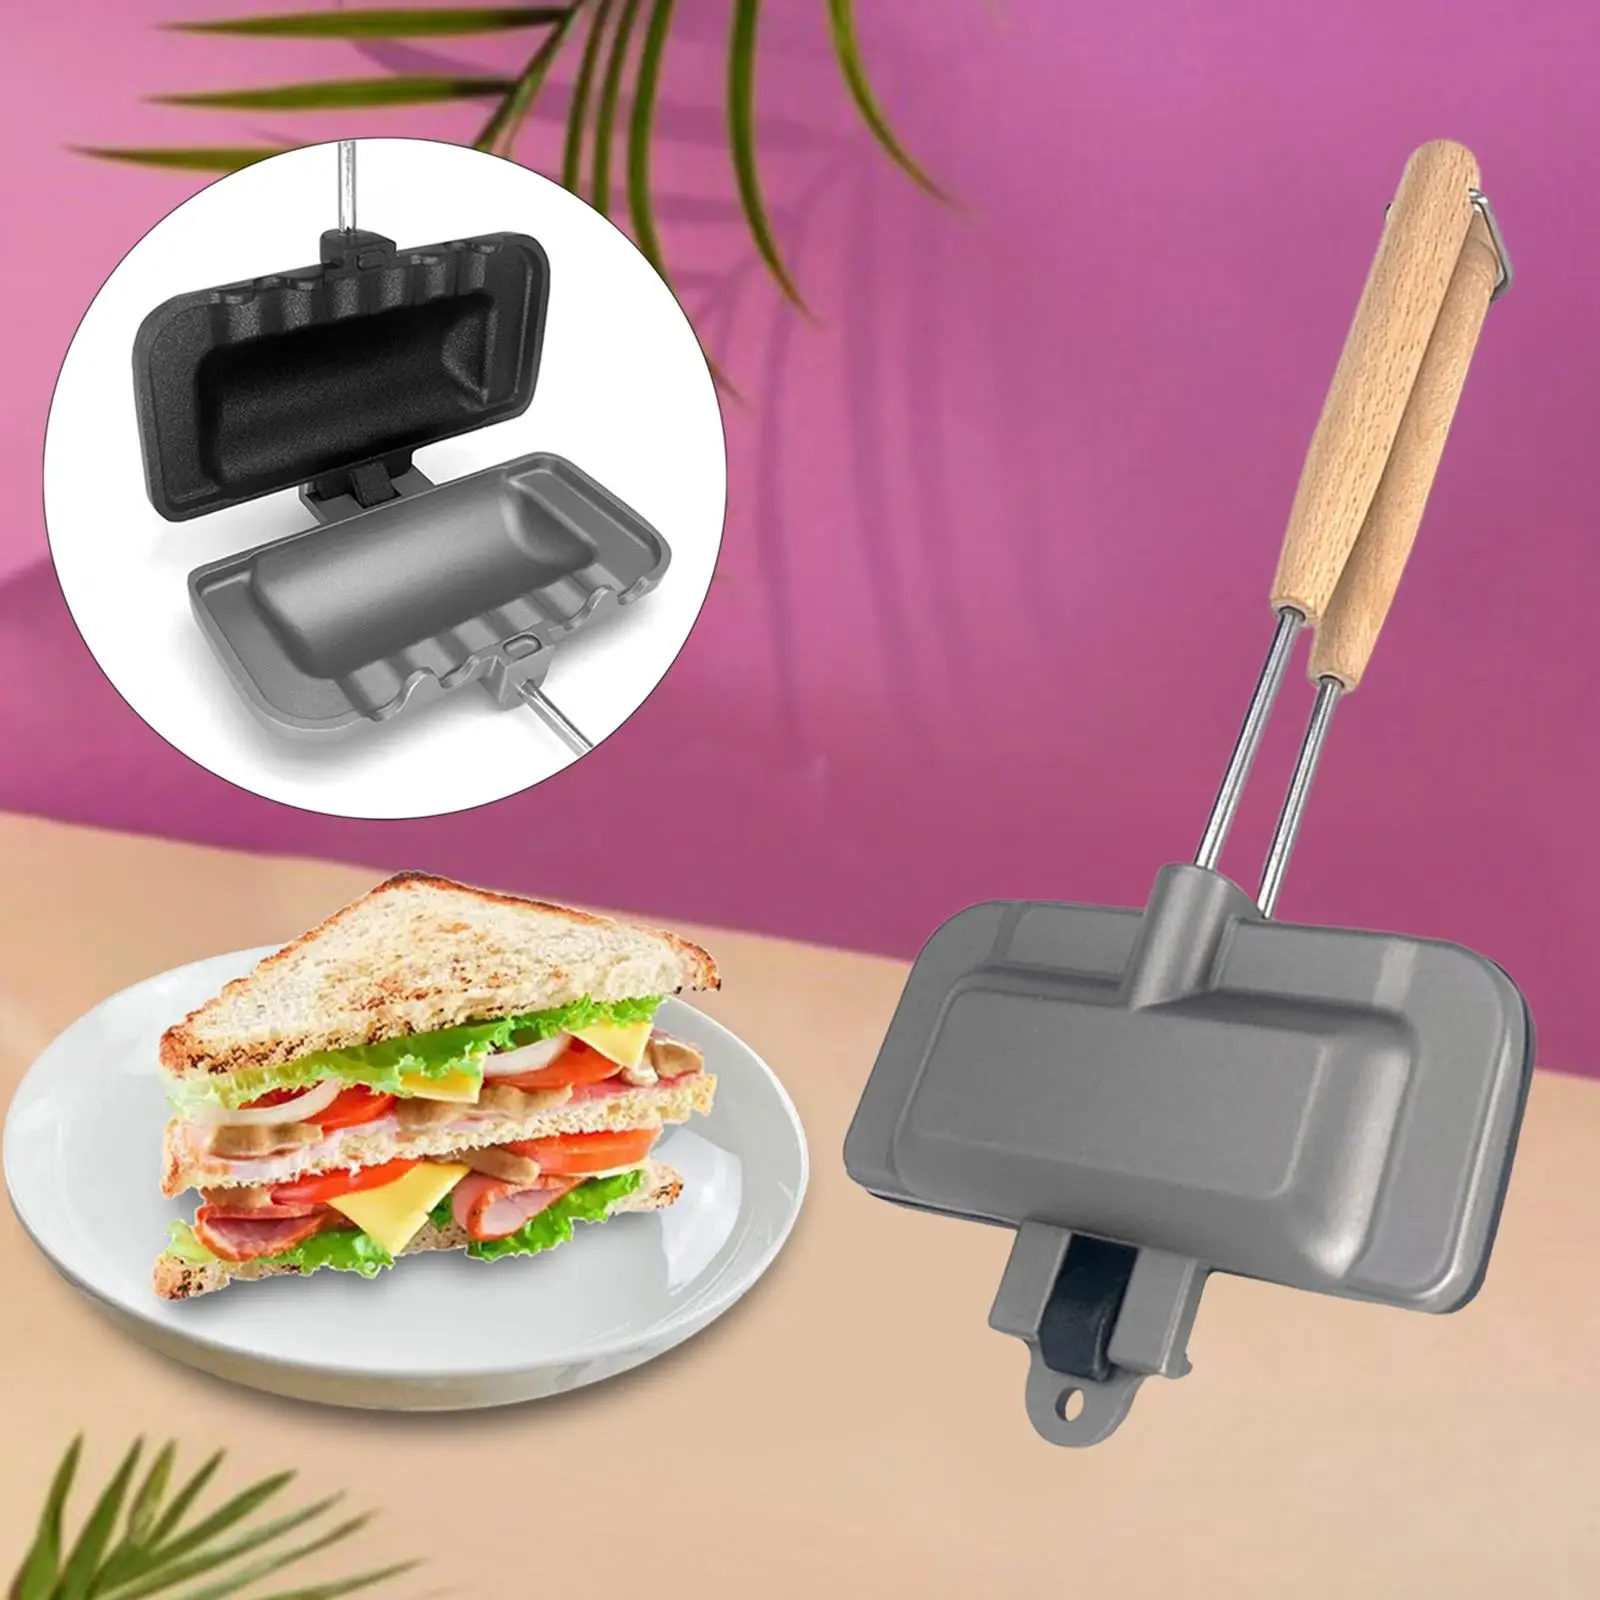 Multifunction Sandwich Pan with Handle Plate for Home Dining Room Kitchen